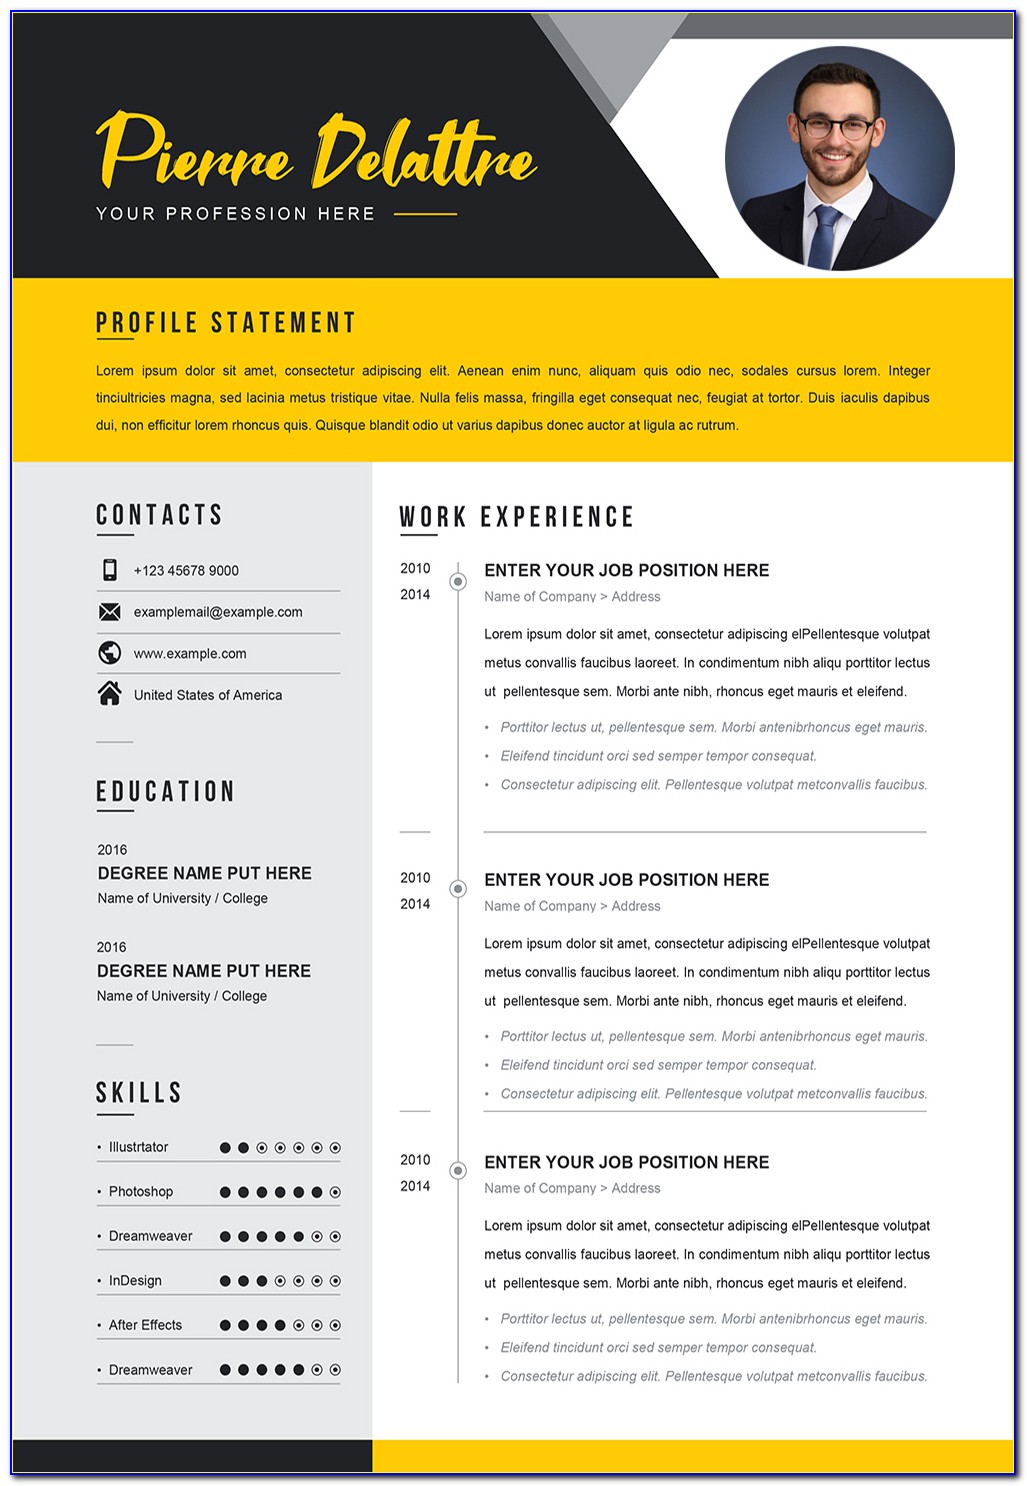 How To Make The Best Resume For Job